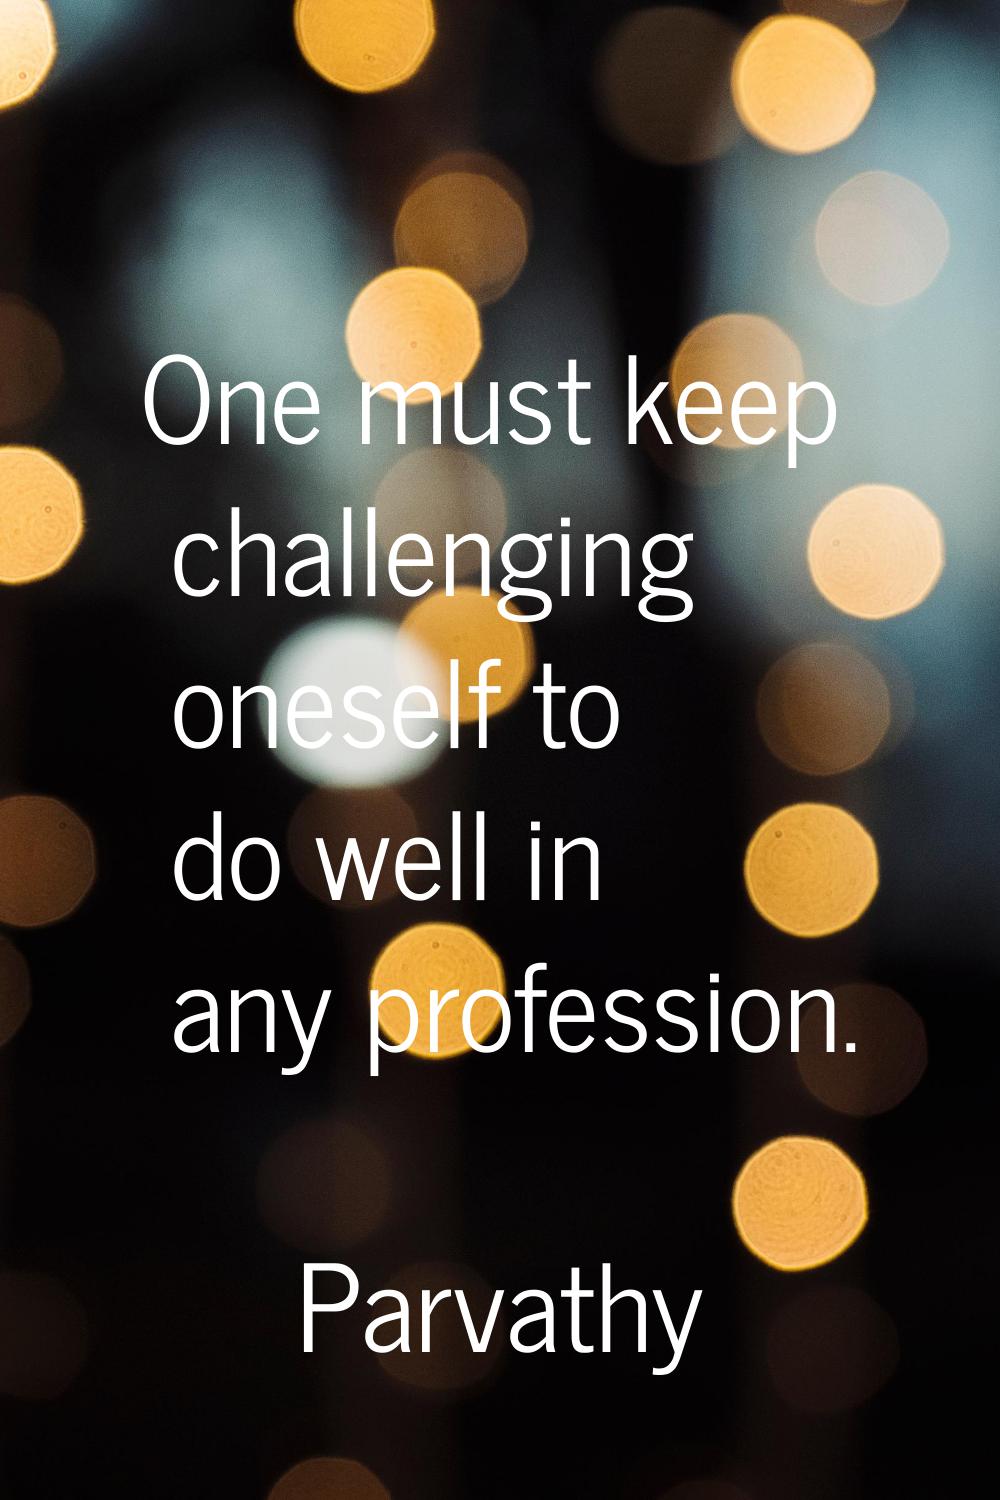 One must keep challenging oneself to do well in any profession.